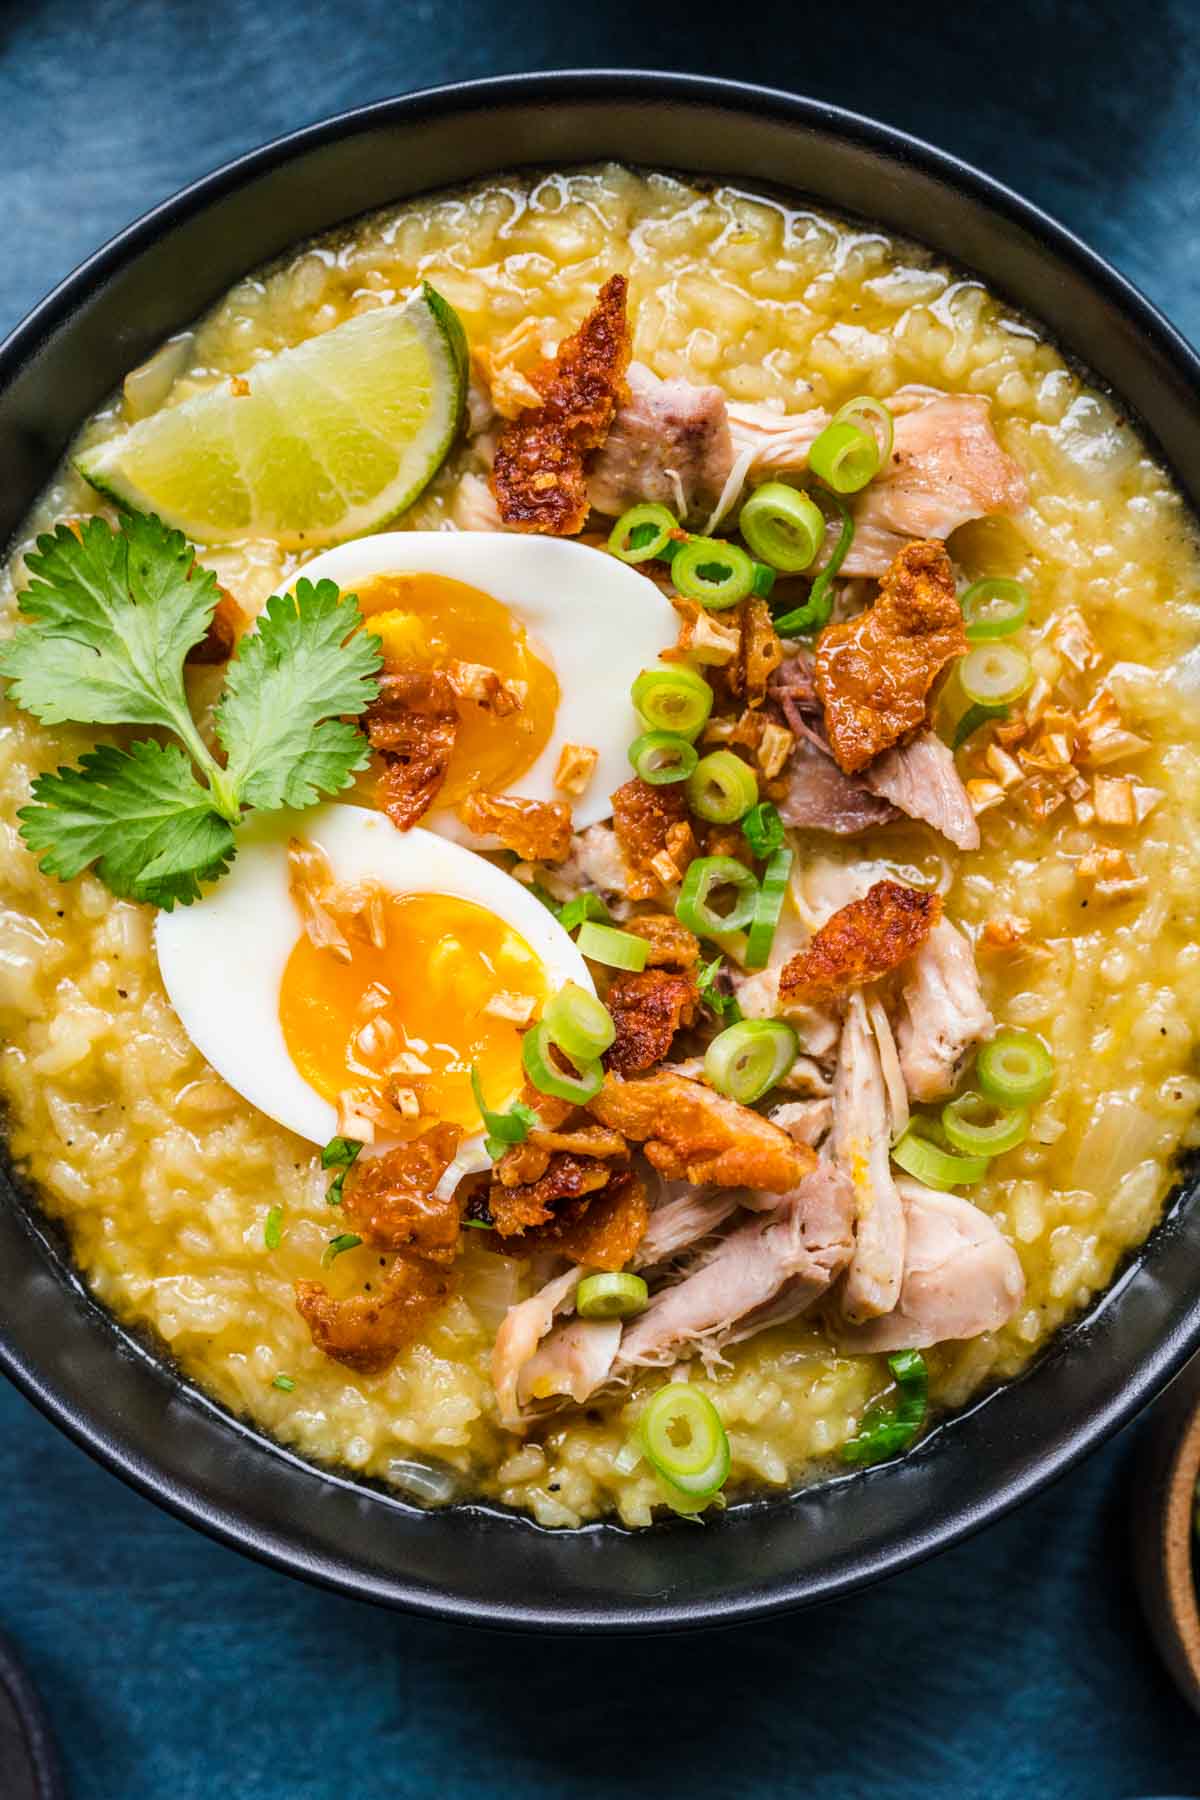 Arroz Caldo finished in bowl with toppings